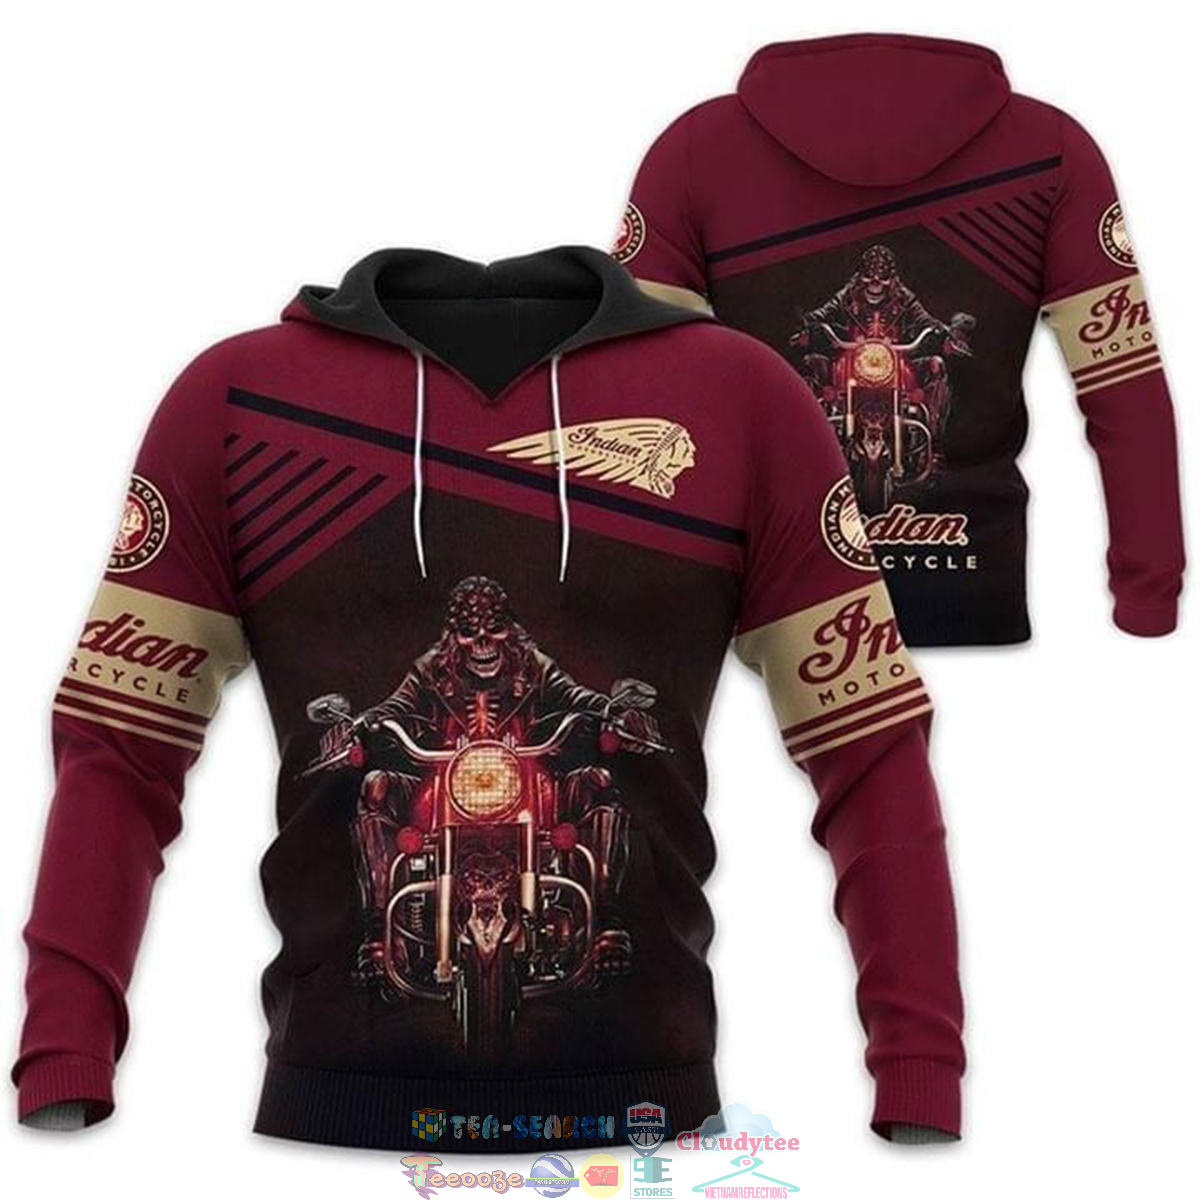 o4HpfmI1-TH040822-21xxxGhost-Rider-Indian-Motorcycle-3D-hoodie-and-t-shirt3.jpg